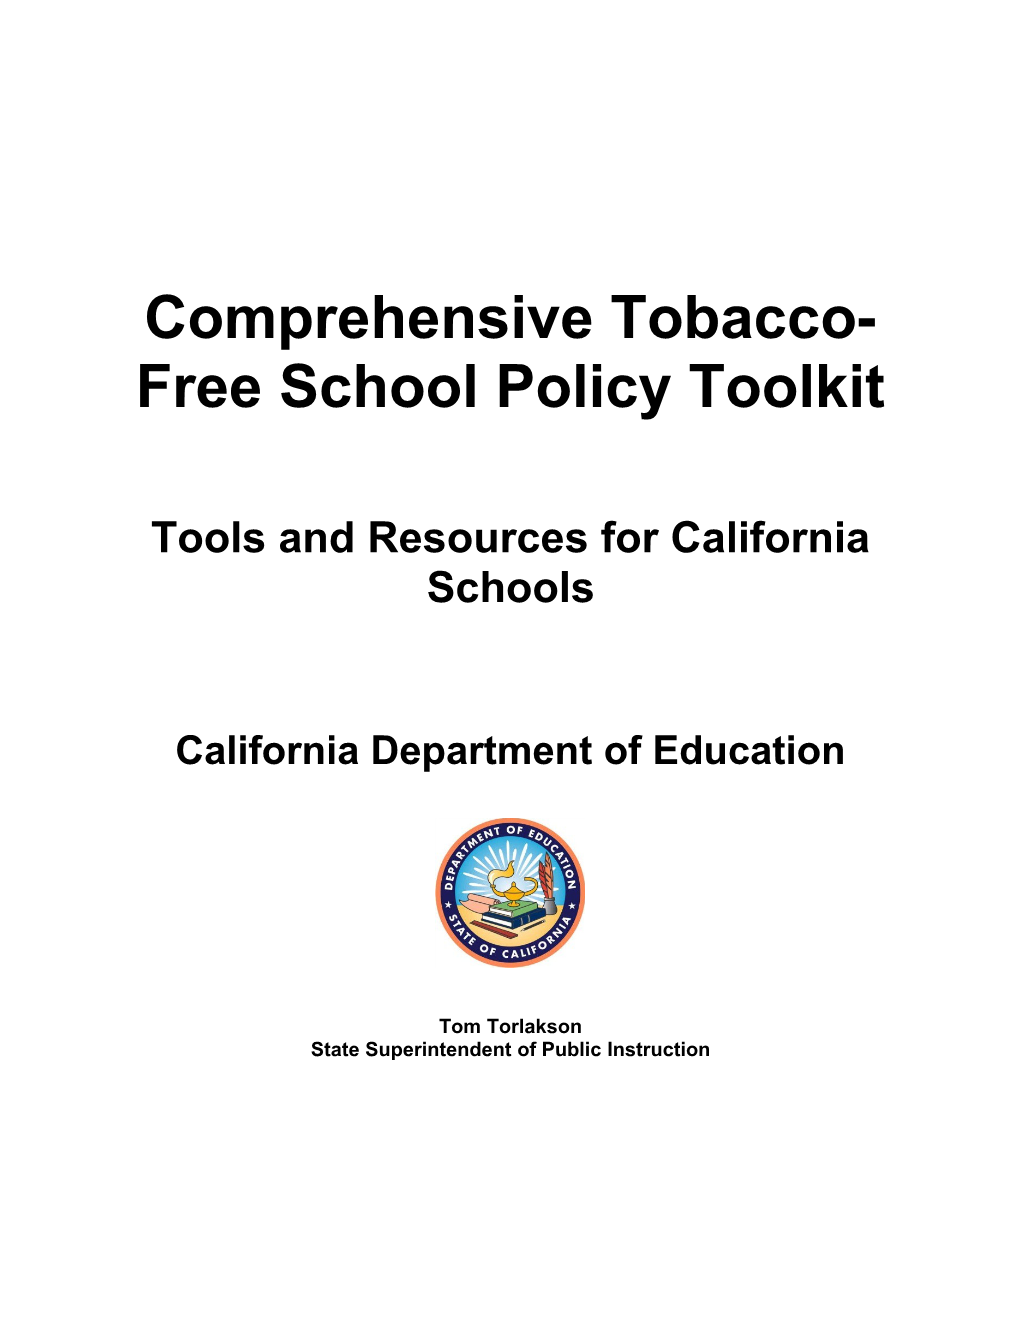 Tobacco-Free Tool Kit - Alcohol, Tobacco & Other Drug Prevention (CA Dept of Education)